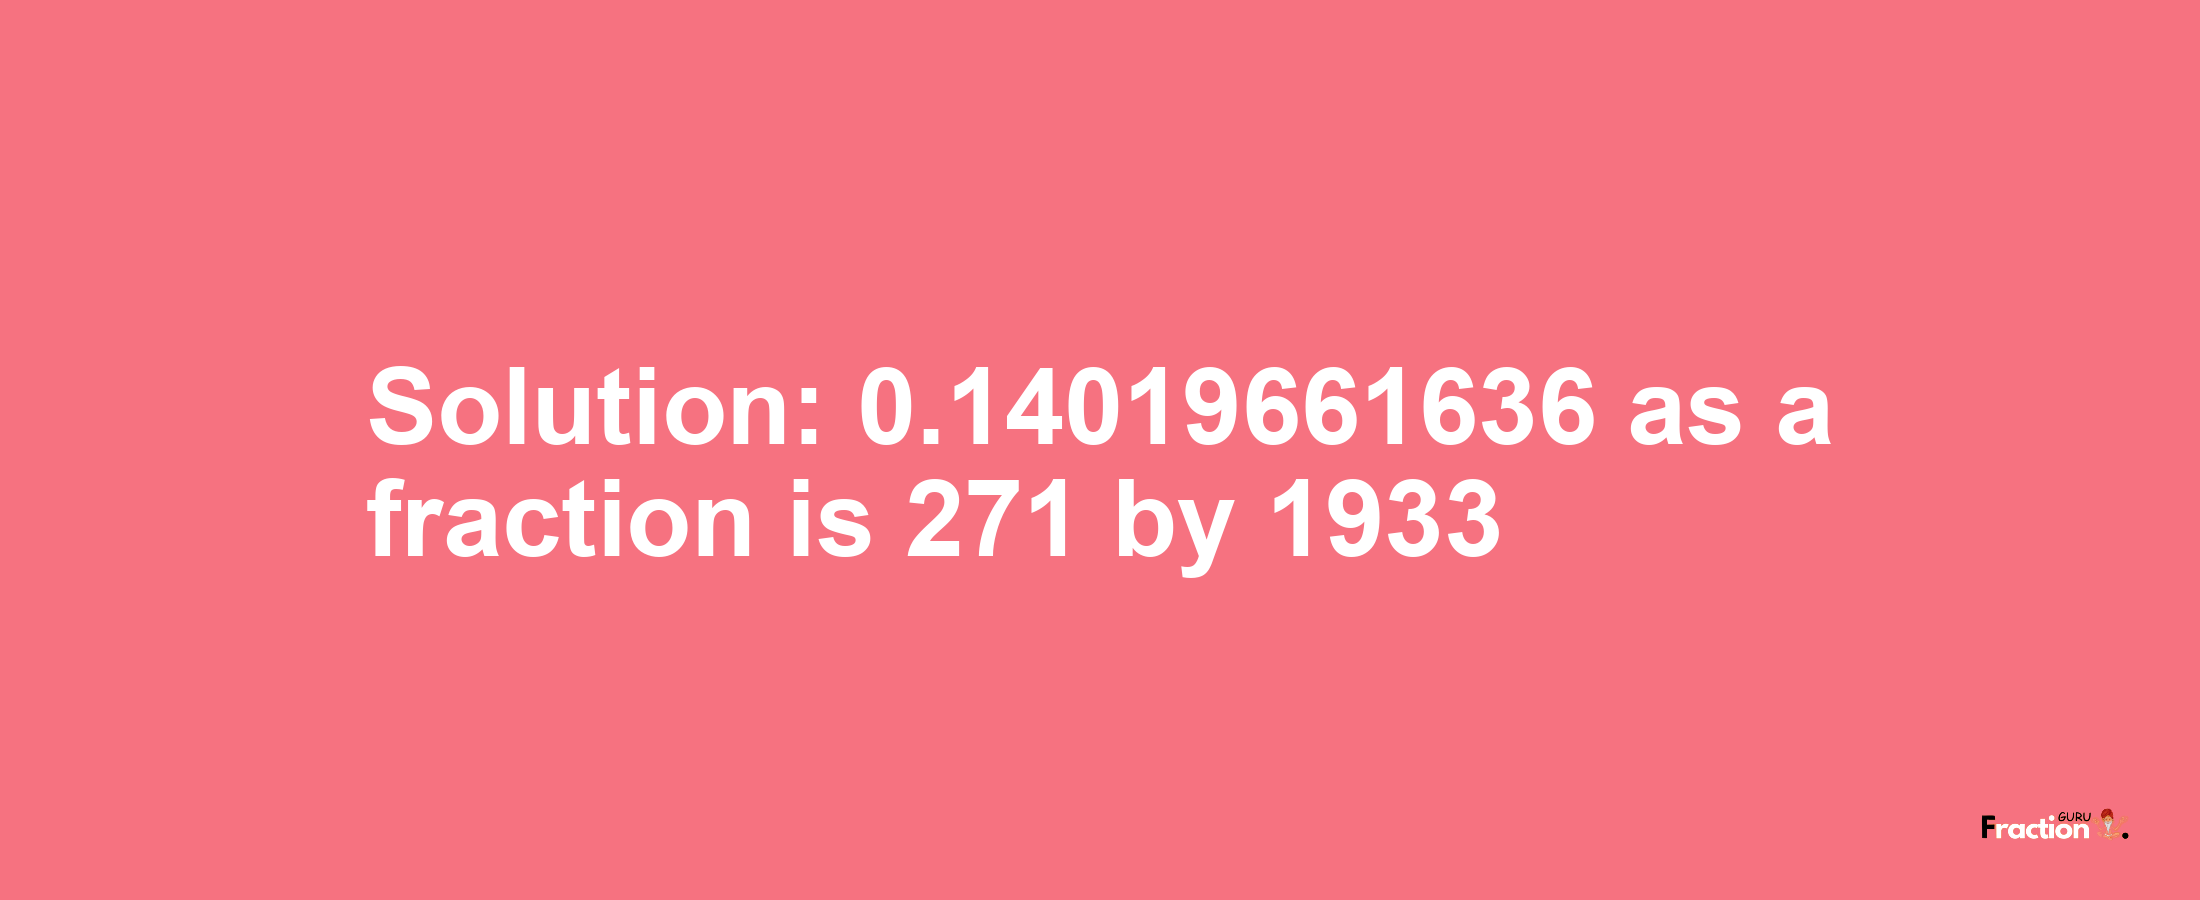 Solution:0.14019661636 as a fraction is 271/1933